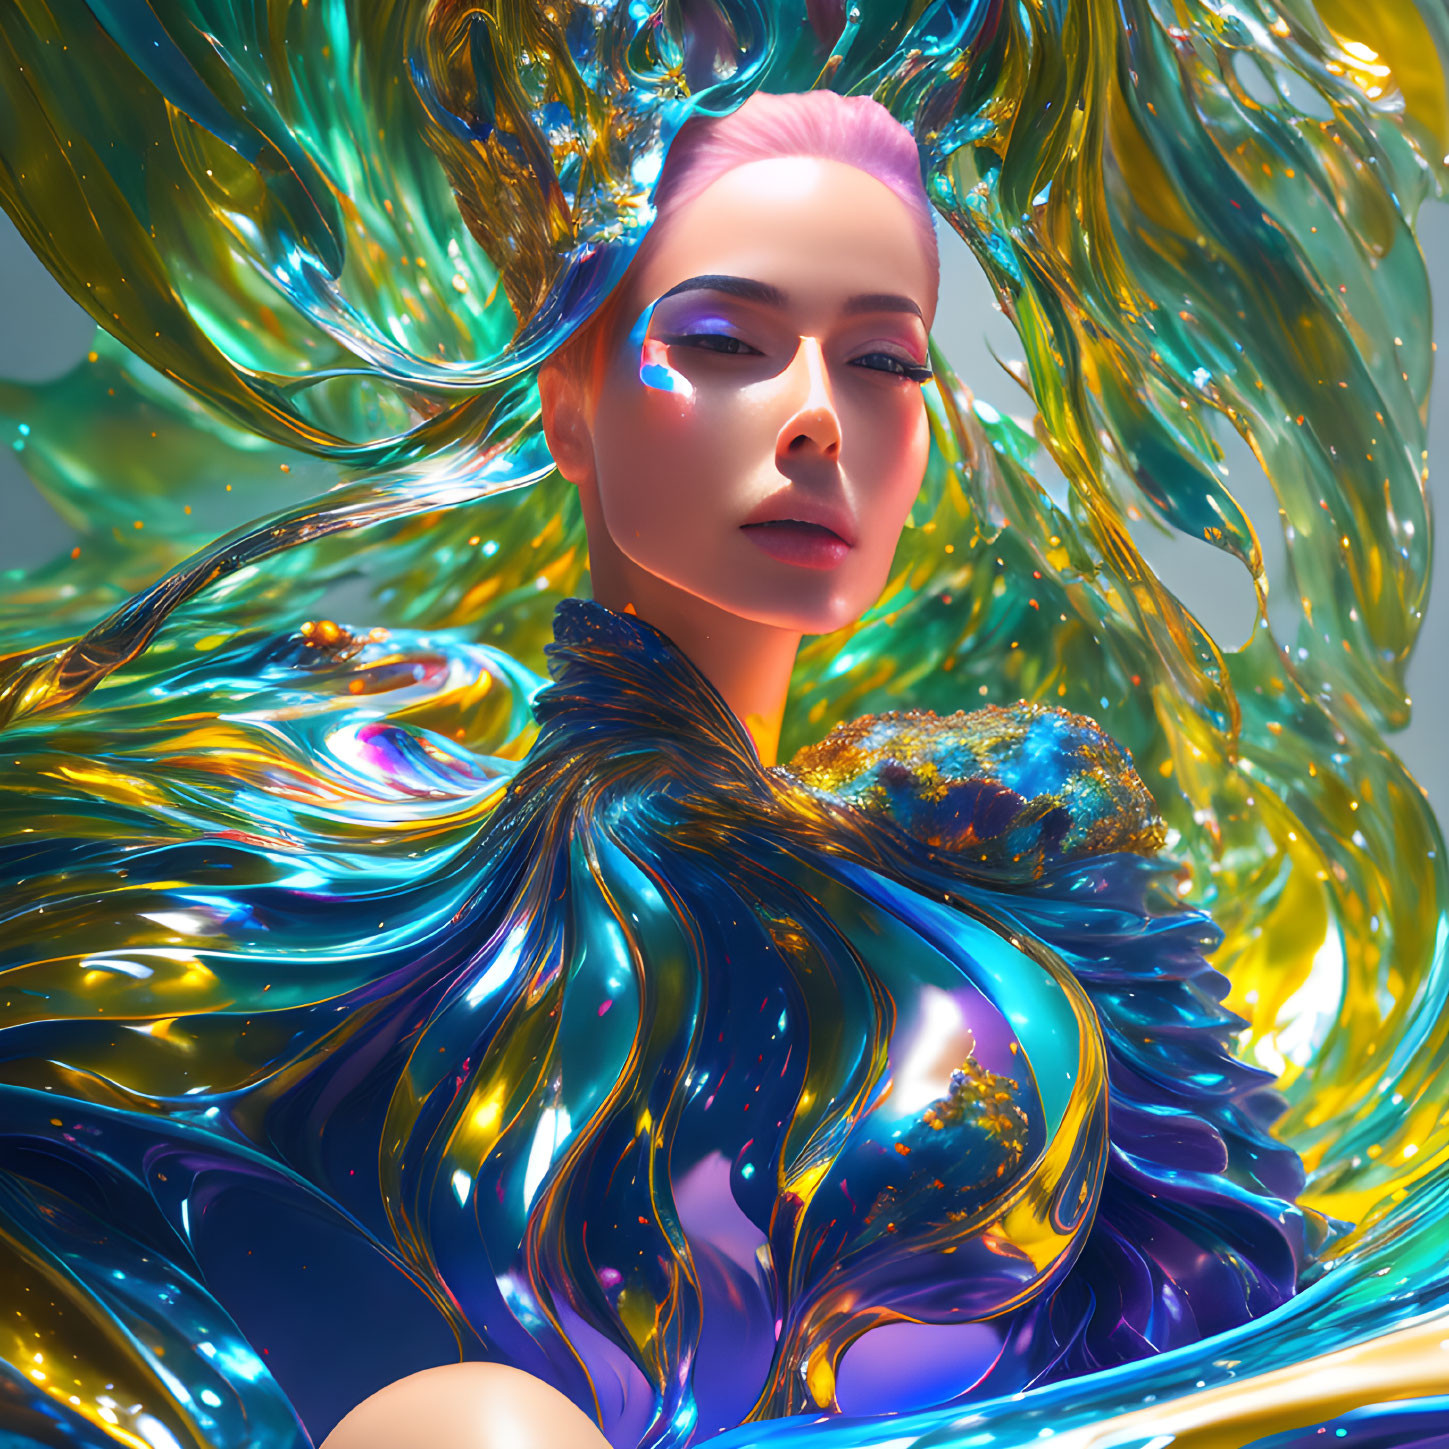 Colorful digital artwork: Person with iridescent hair and attire in blue, gold, and green